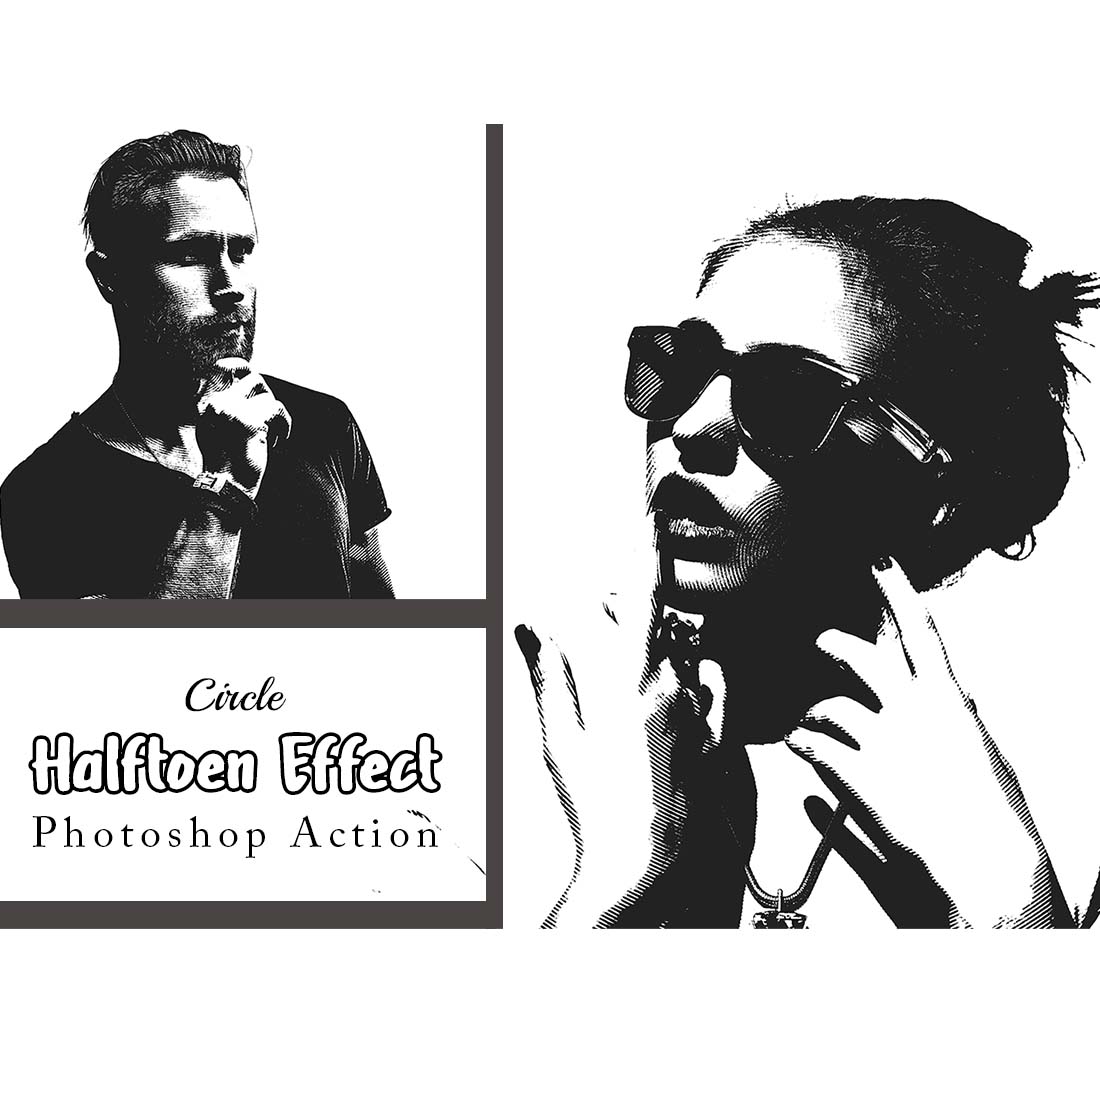 Circle Halftone Effect Photoshop Action cover image.